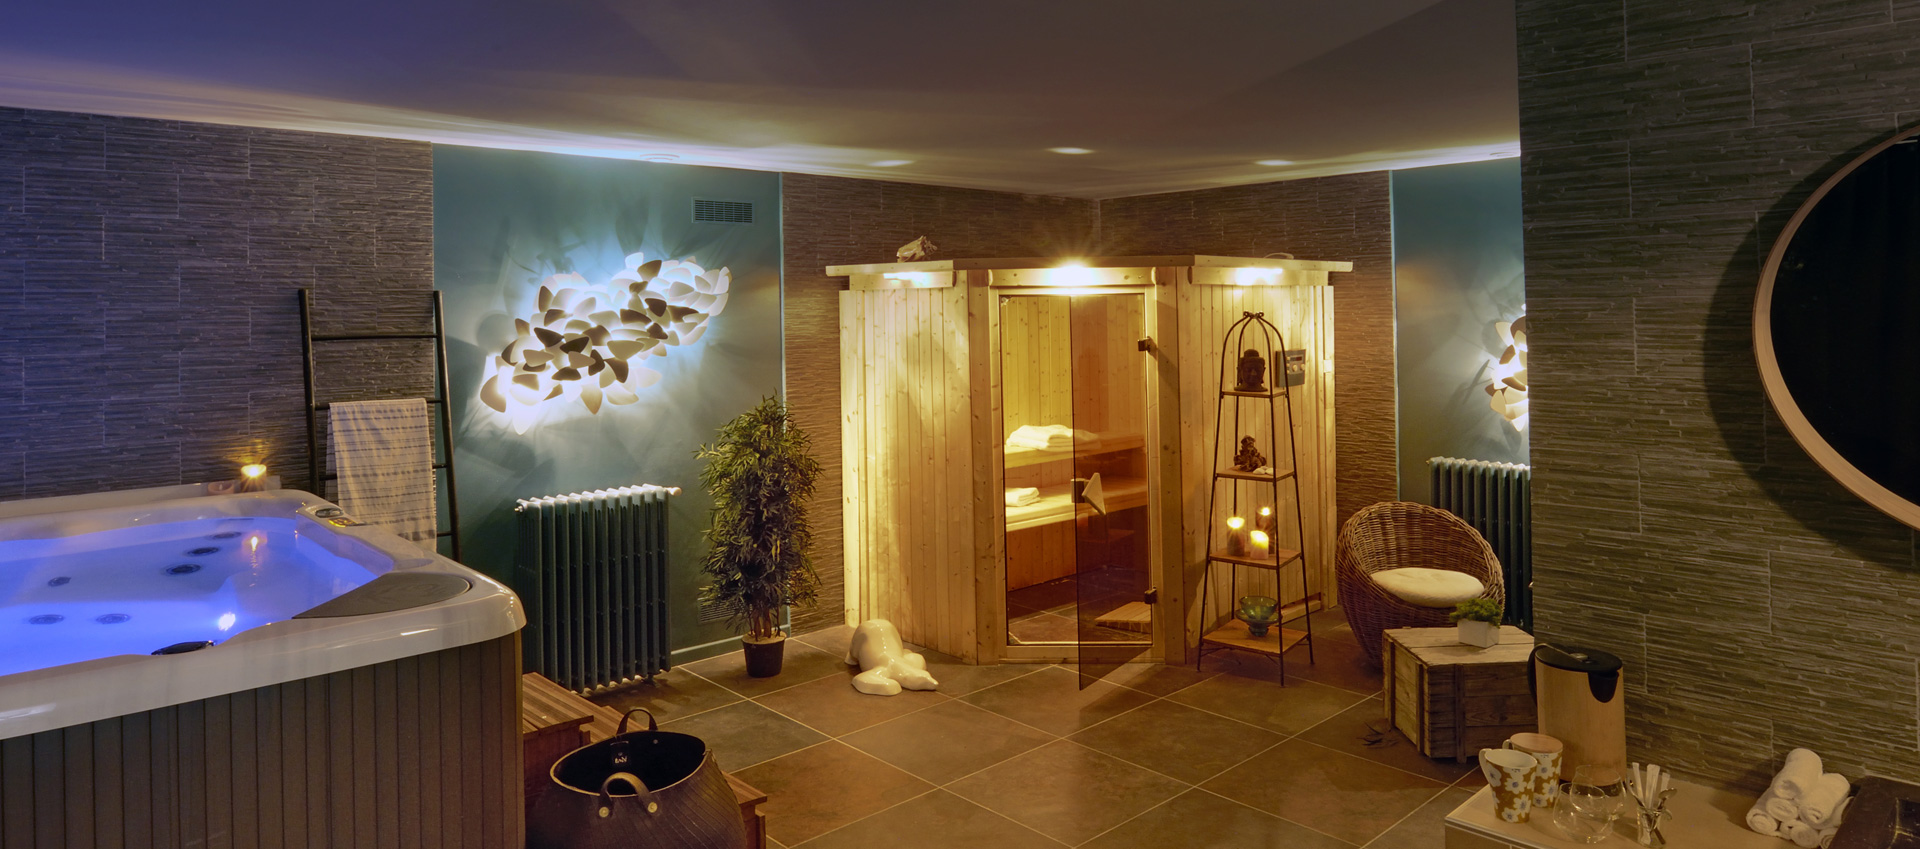 Wellness area in your guest house Sète